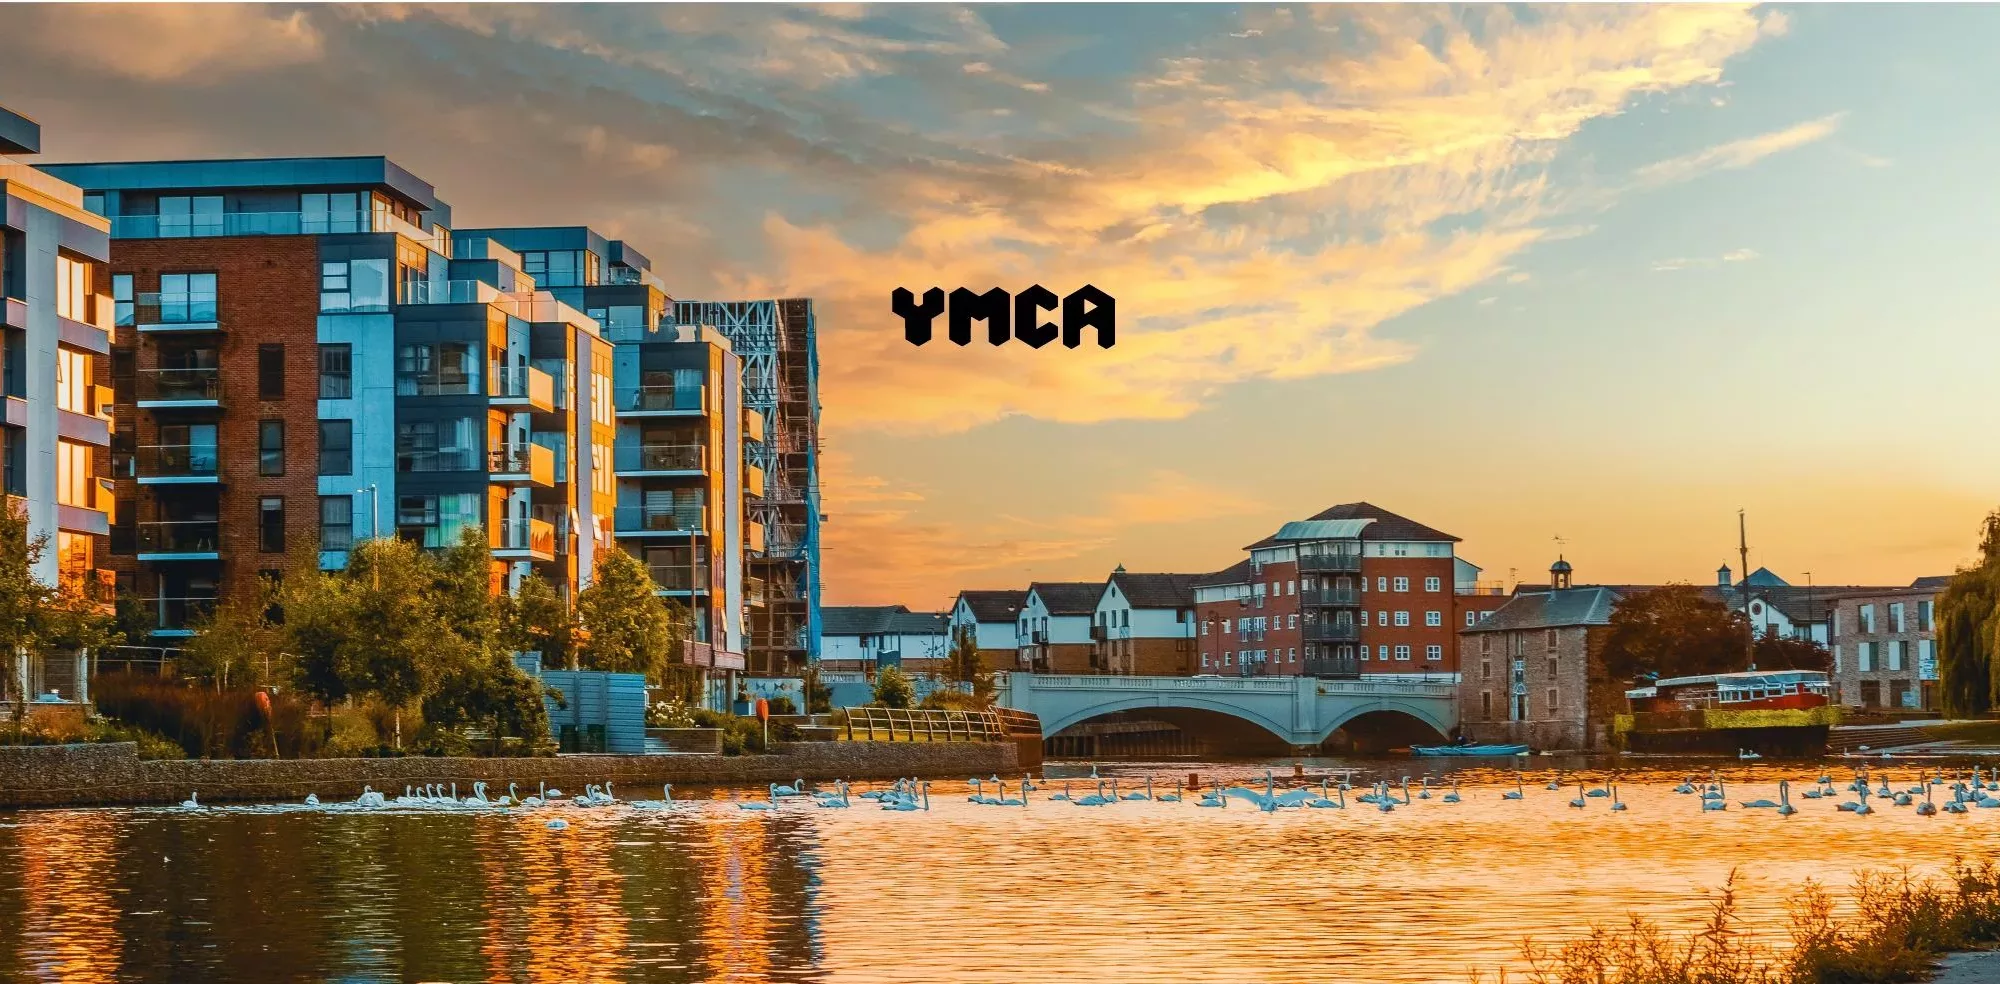 Charities - The YMCA Logo Displayed On An Image Of The River That Runs Through Peterborough